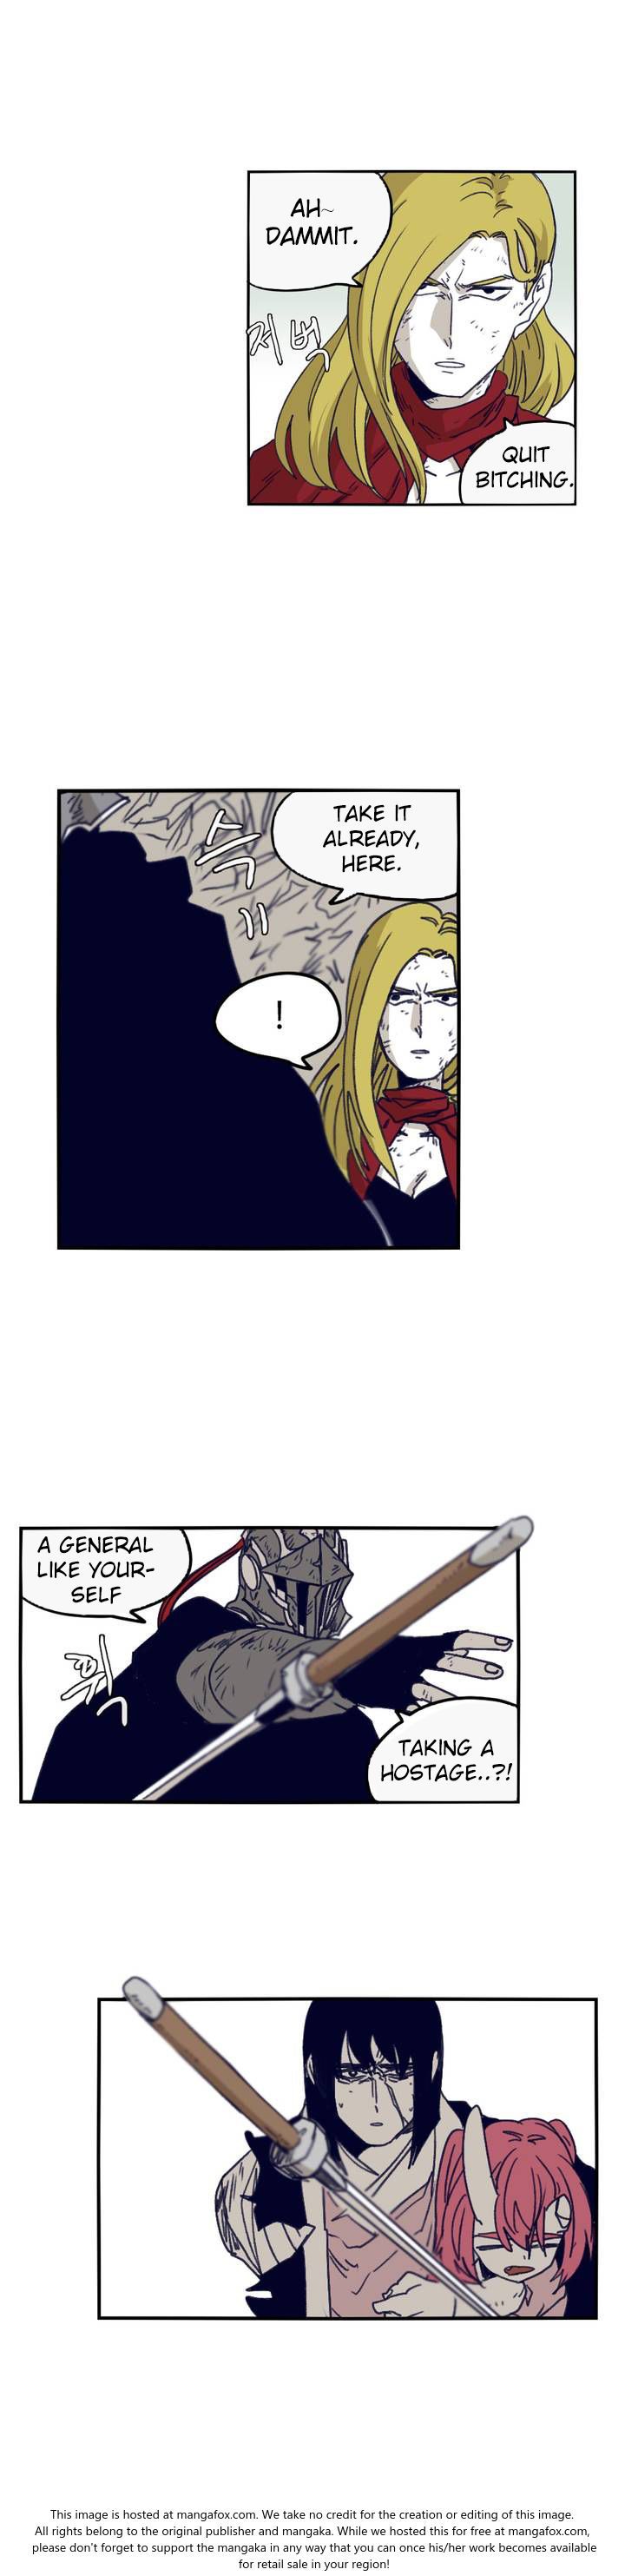 Epic of Gilgamesh Chapter 090 page 4